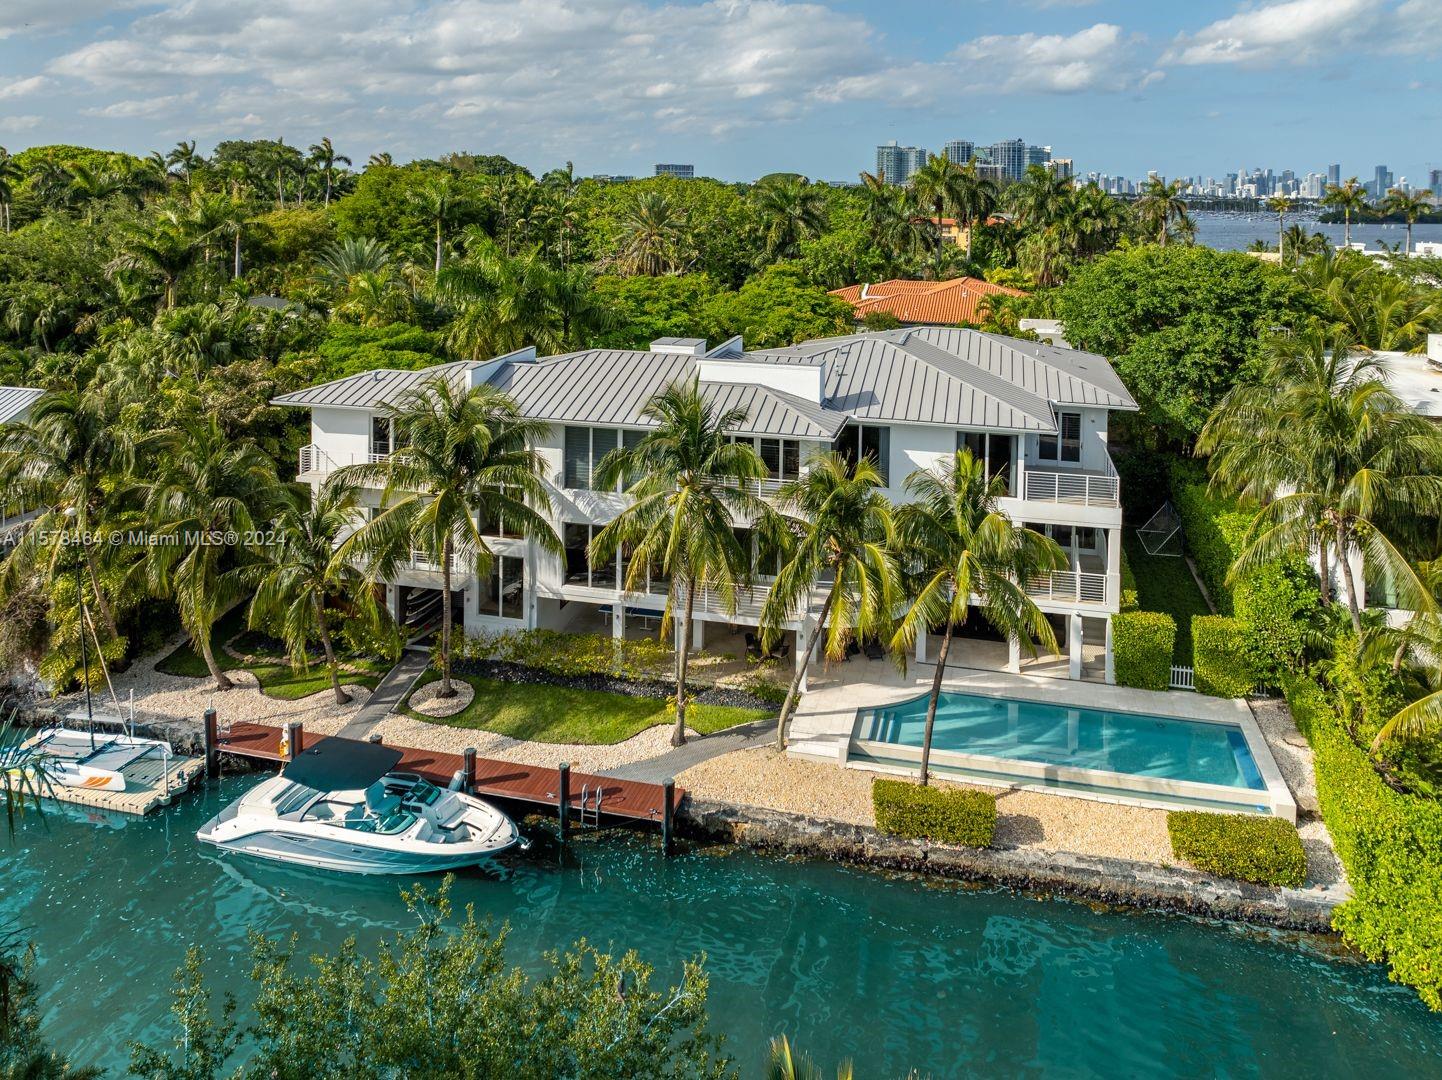 Breathtaking 11,316 SF waterfront home in Four Way Lodge Estates,  a highly sought-after gated community in Coconut Grove. with 6 bedrooms, 6 bathrooms and 2 half-bathrooms. Voluminous ceilings and a light-filled open floor plan provide for beautiful water views. The  gourmet kitchen includes an expansive island, gas stove, and premium appliances, and a covered terrace has a fully equipped summer kitchen and play area with turf. The estate offers 150 ft of water frontage and easy access to Biscayne Bay. A stunning infinity saltwater pool overlooks the waterway, and a floating dock tied to a lighted seawall area accommodates boats of various sizes.  Other features include an elevator, whole house generator, impact windows and doors, 2-car garage, and 3 carports.